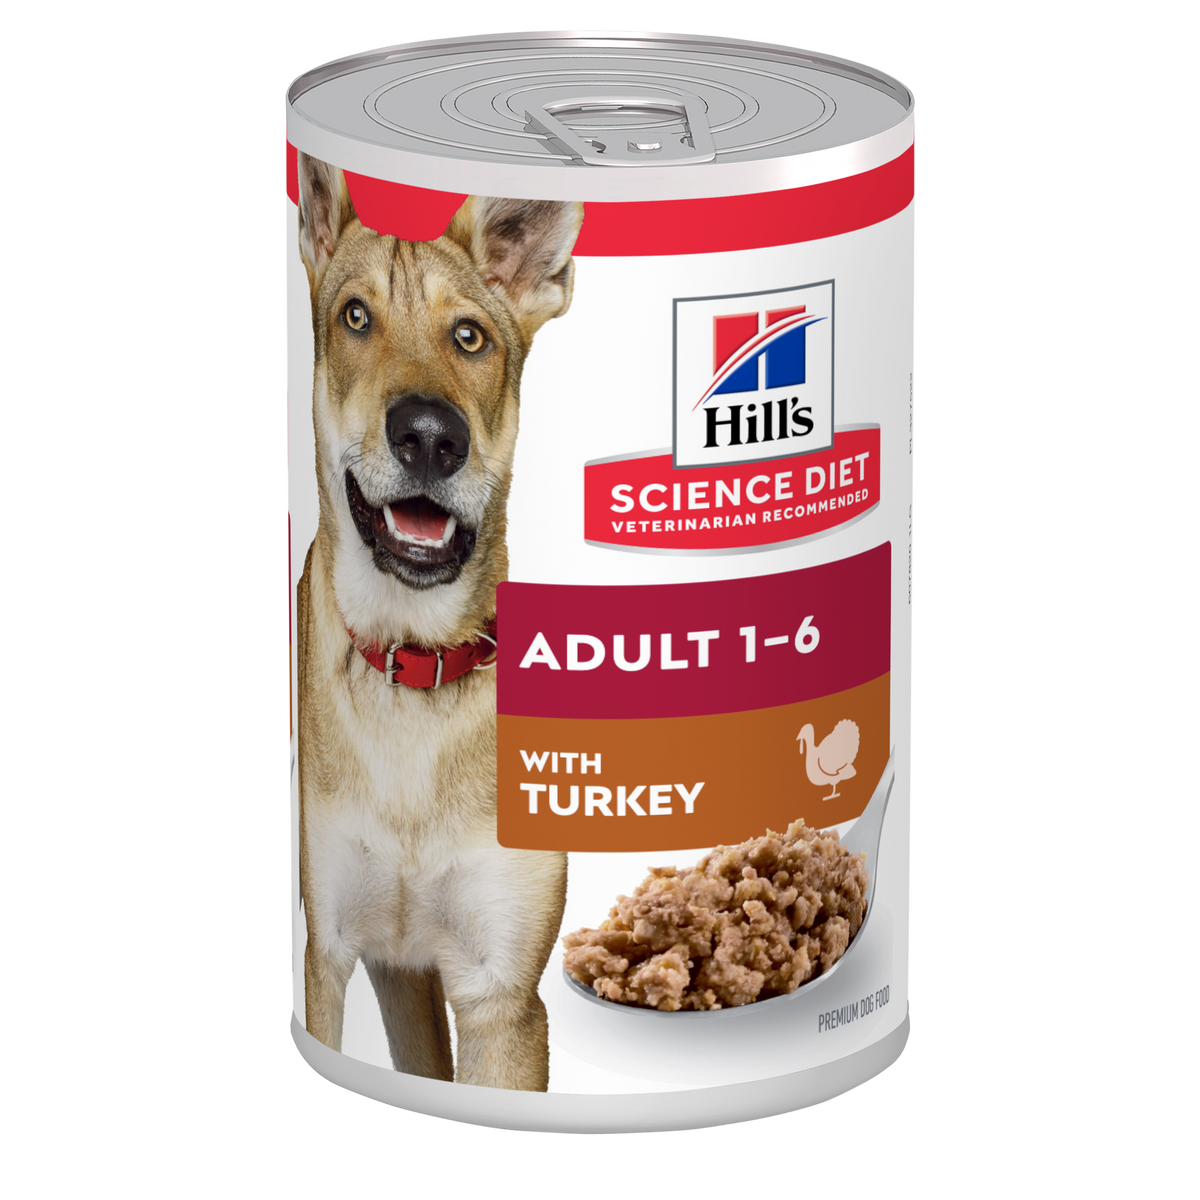 Hill's Science Diet Adult Dog Turkey Wet Food 370g X 12 Cans